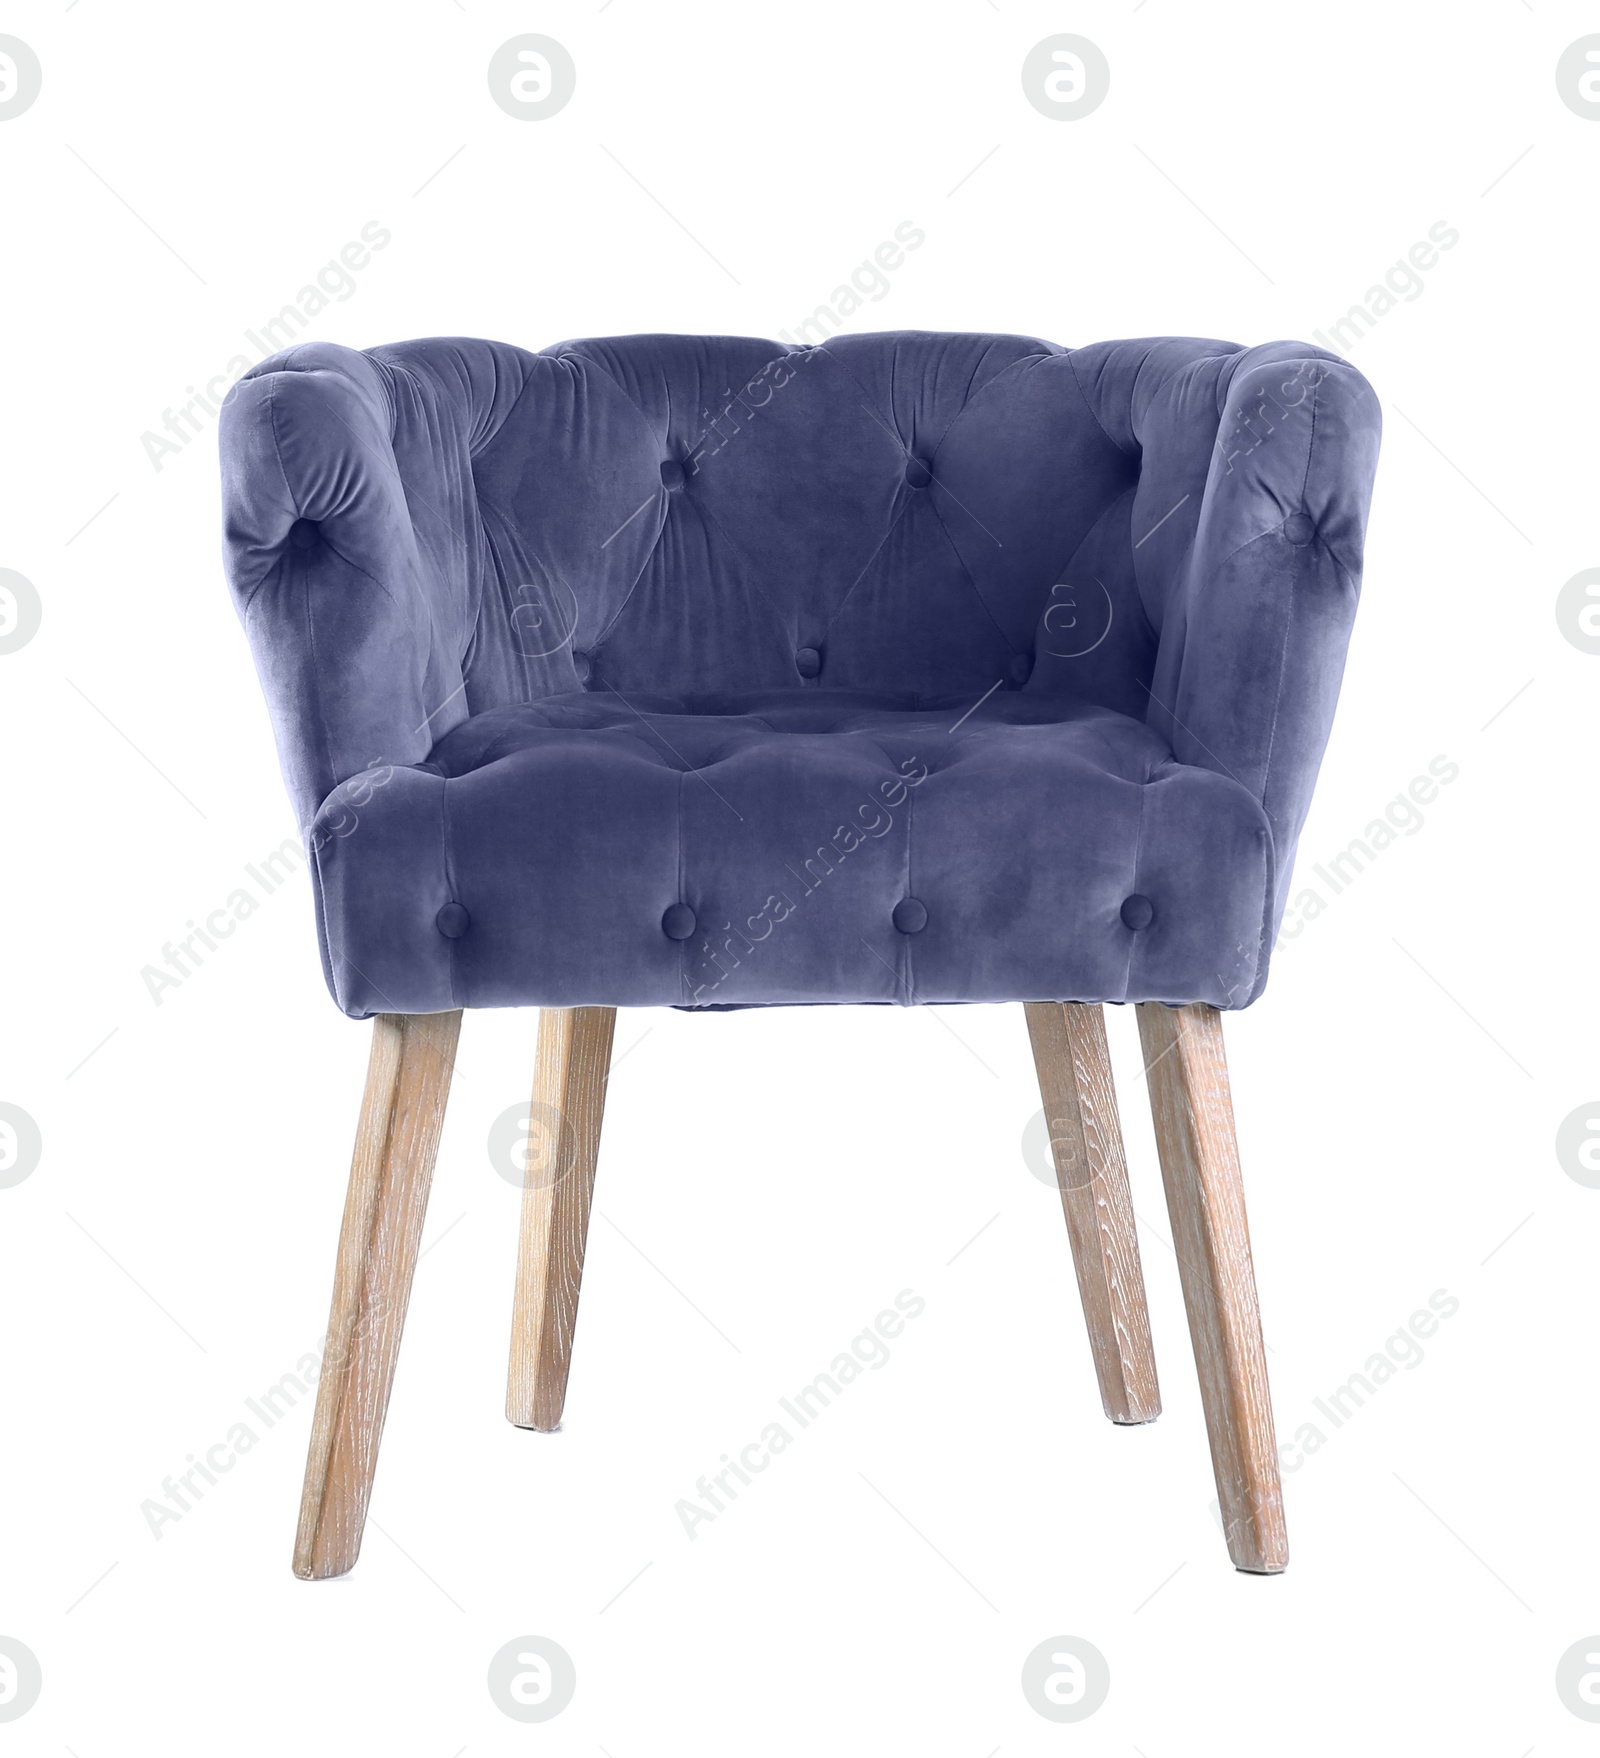 Image of One comfortable ultra violet armchair isolated on white